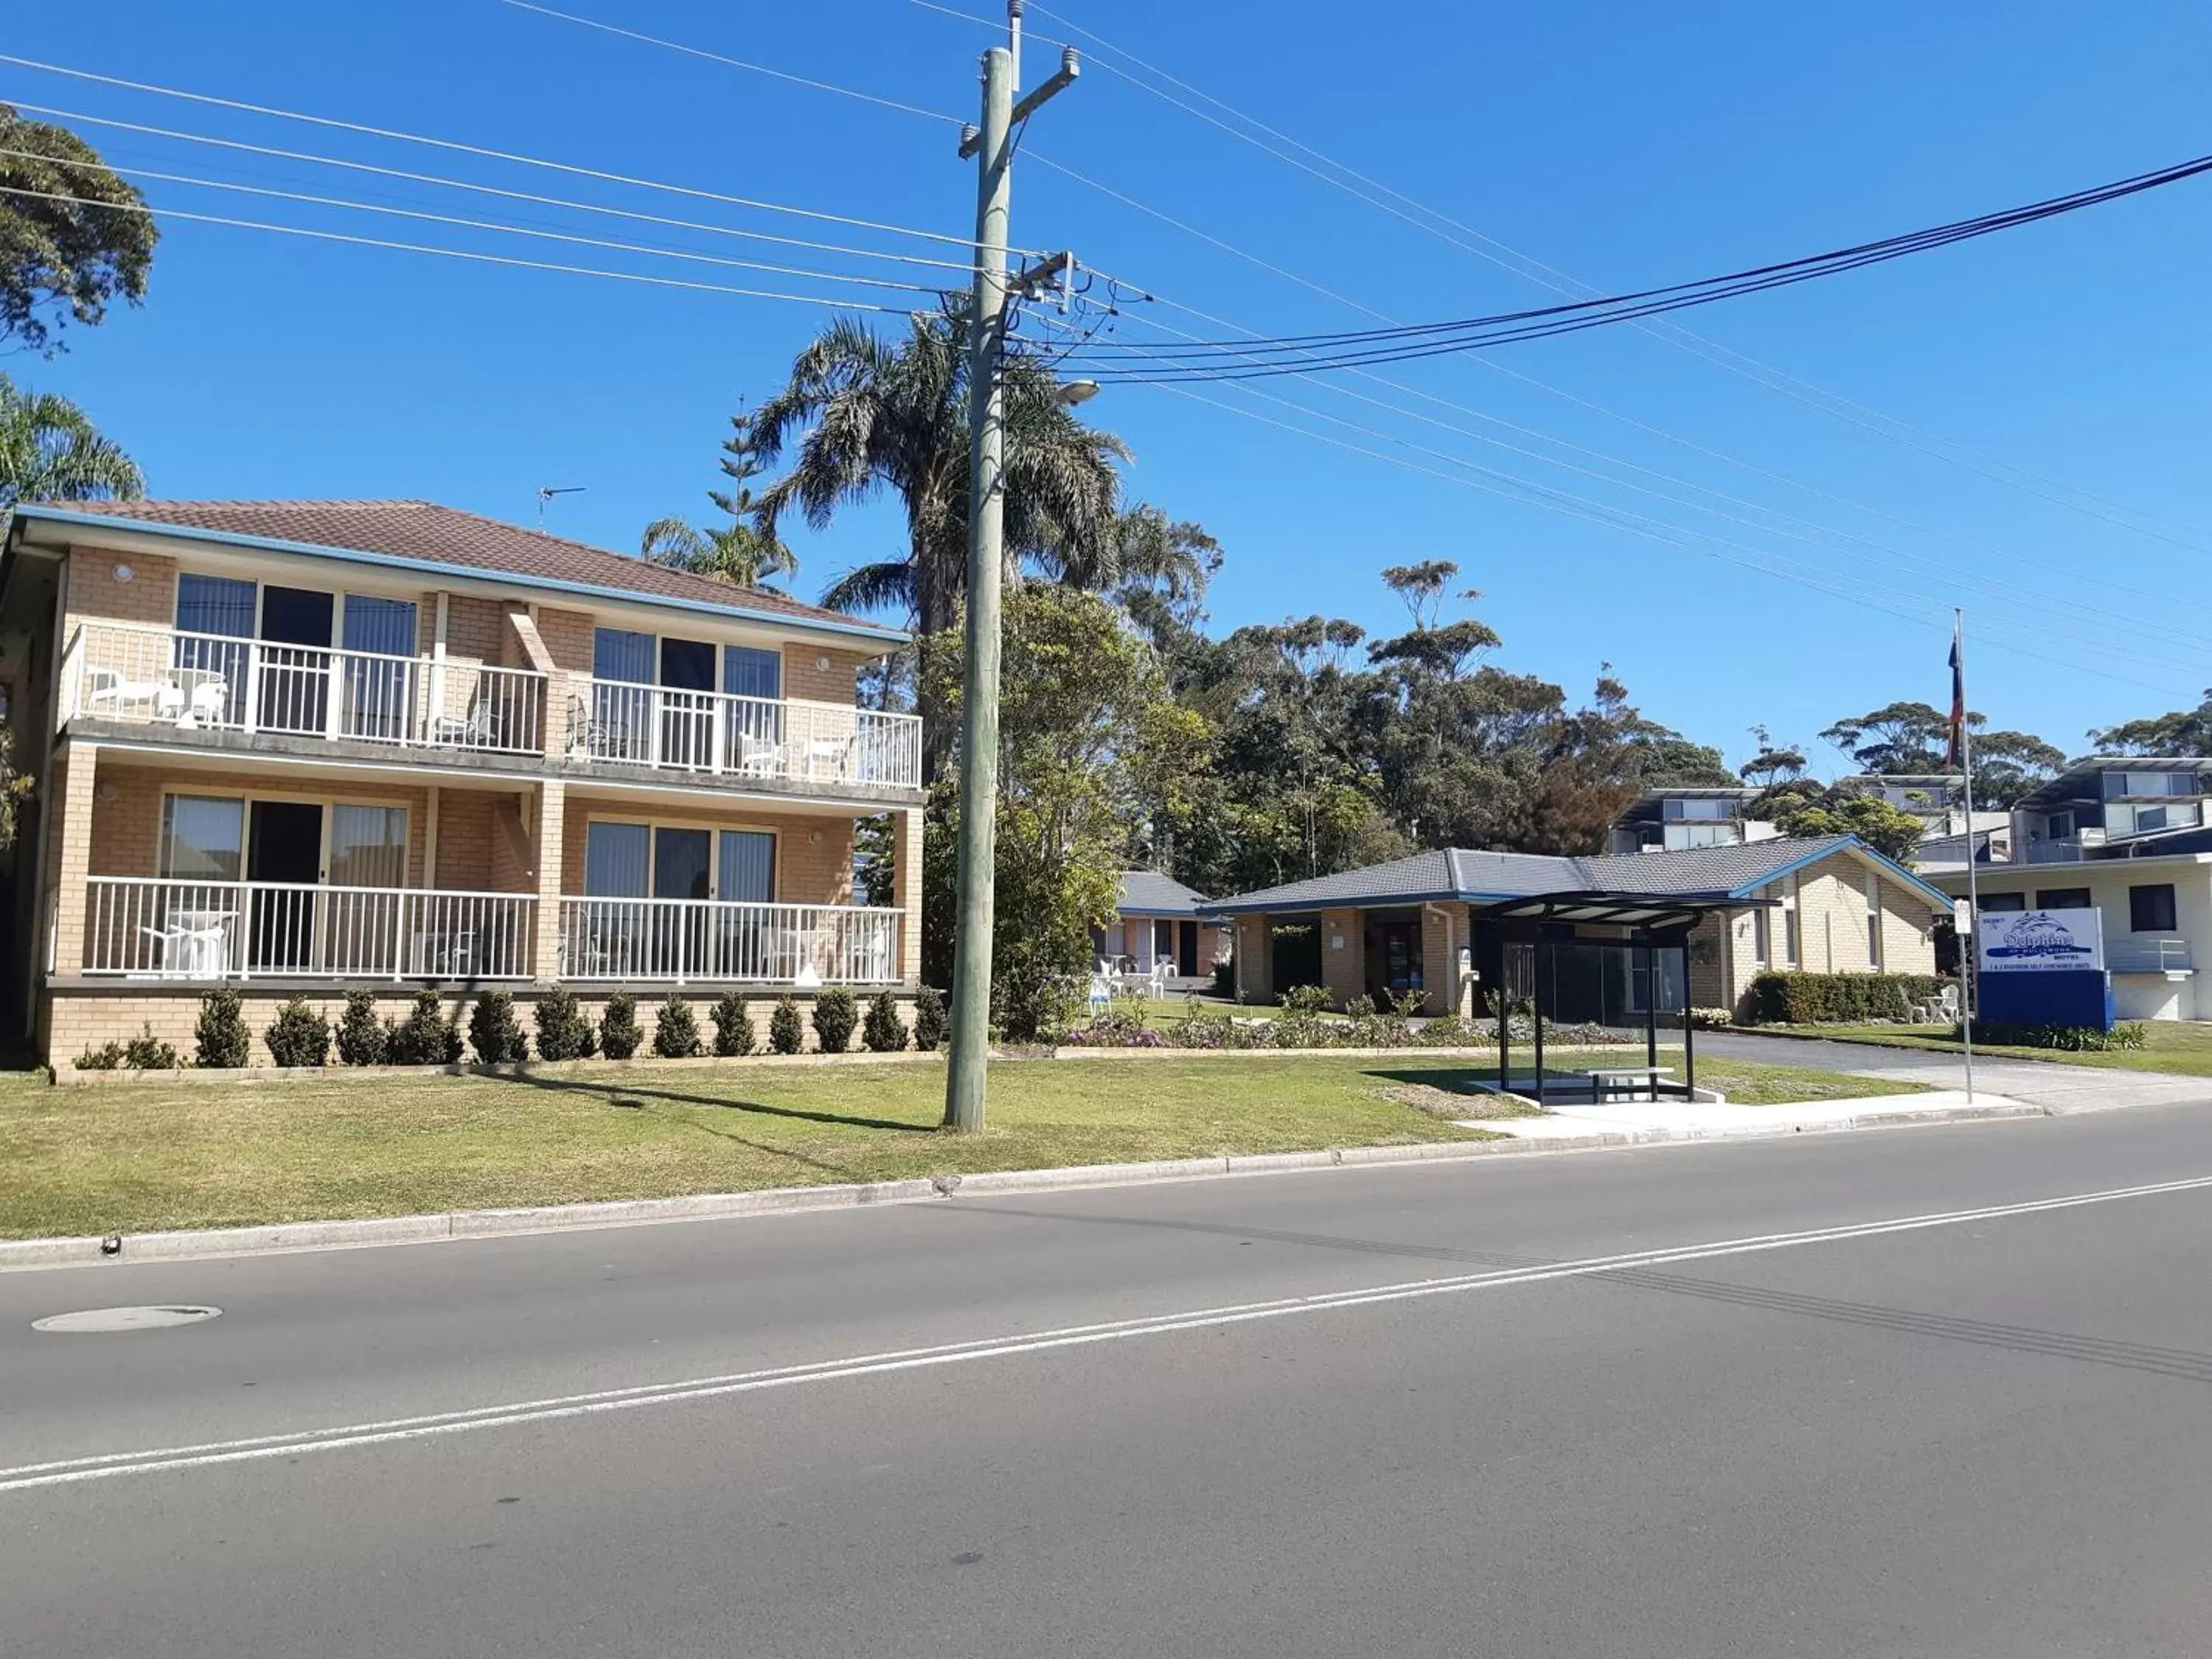 Property Building in Dolphins of Mollymook Motel and Fifth Green Apartments